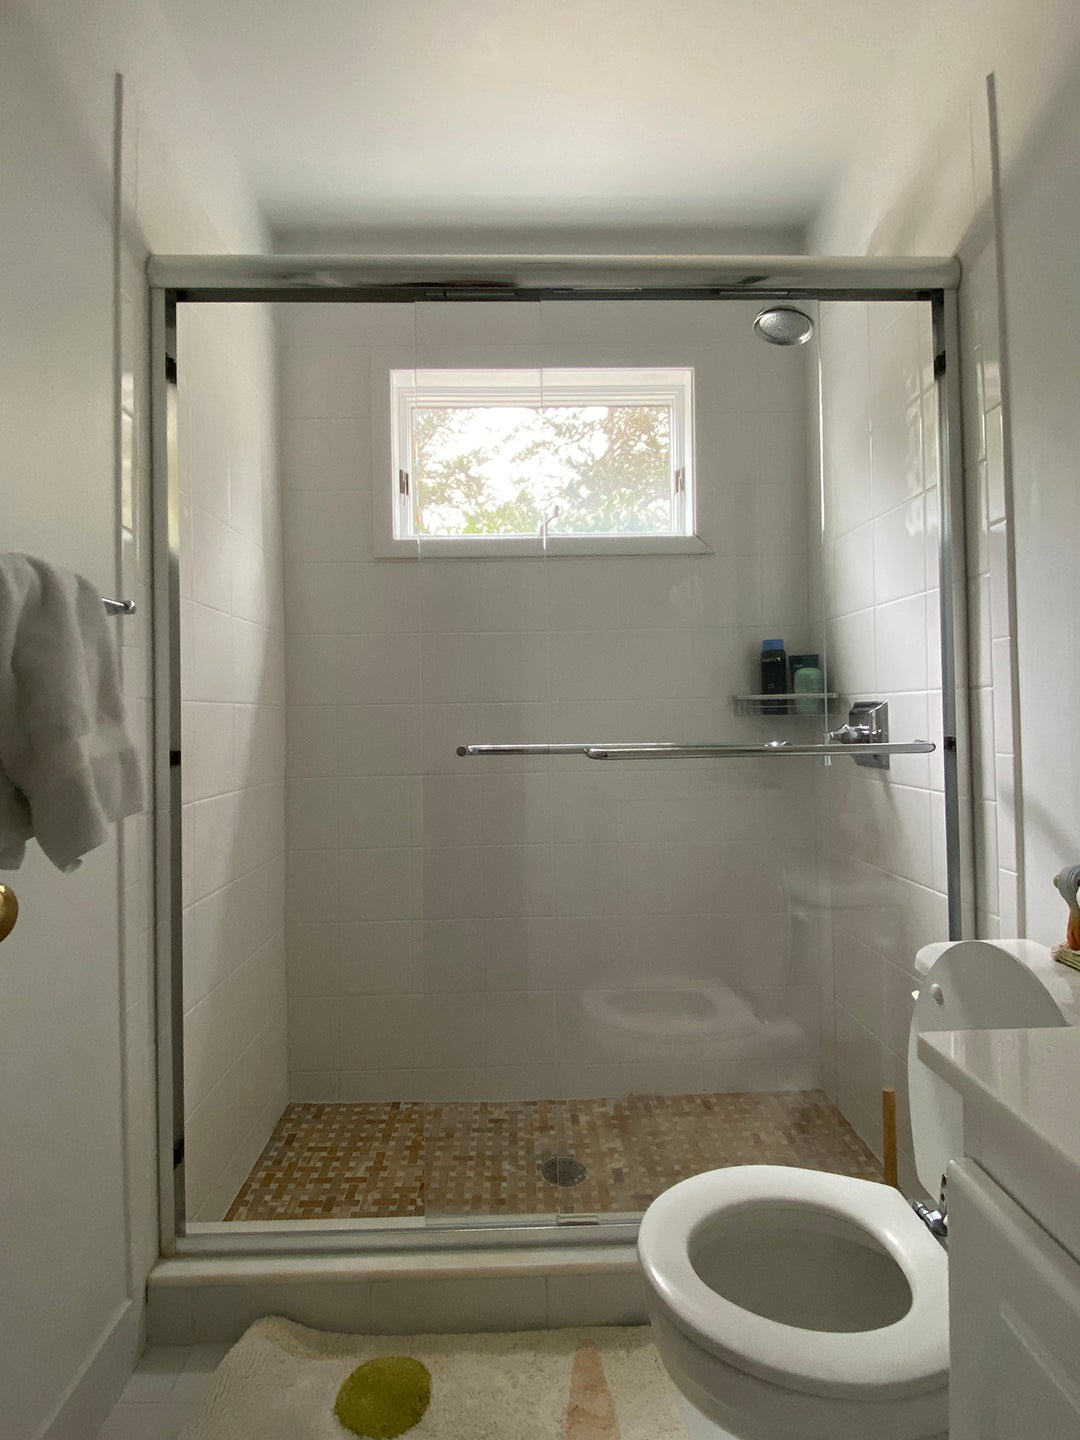 shower wall with window